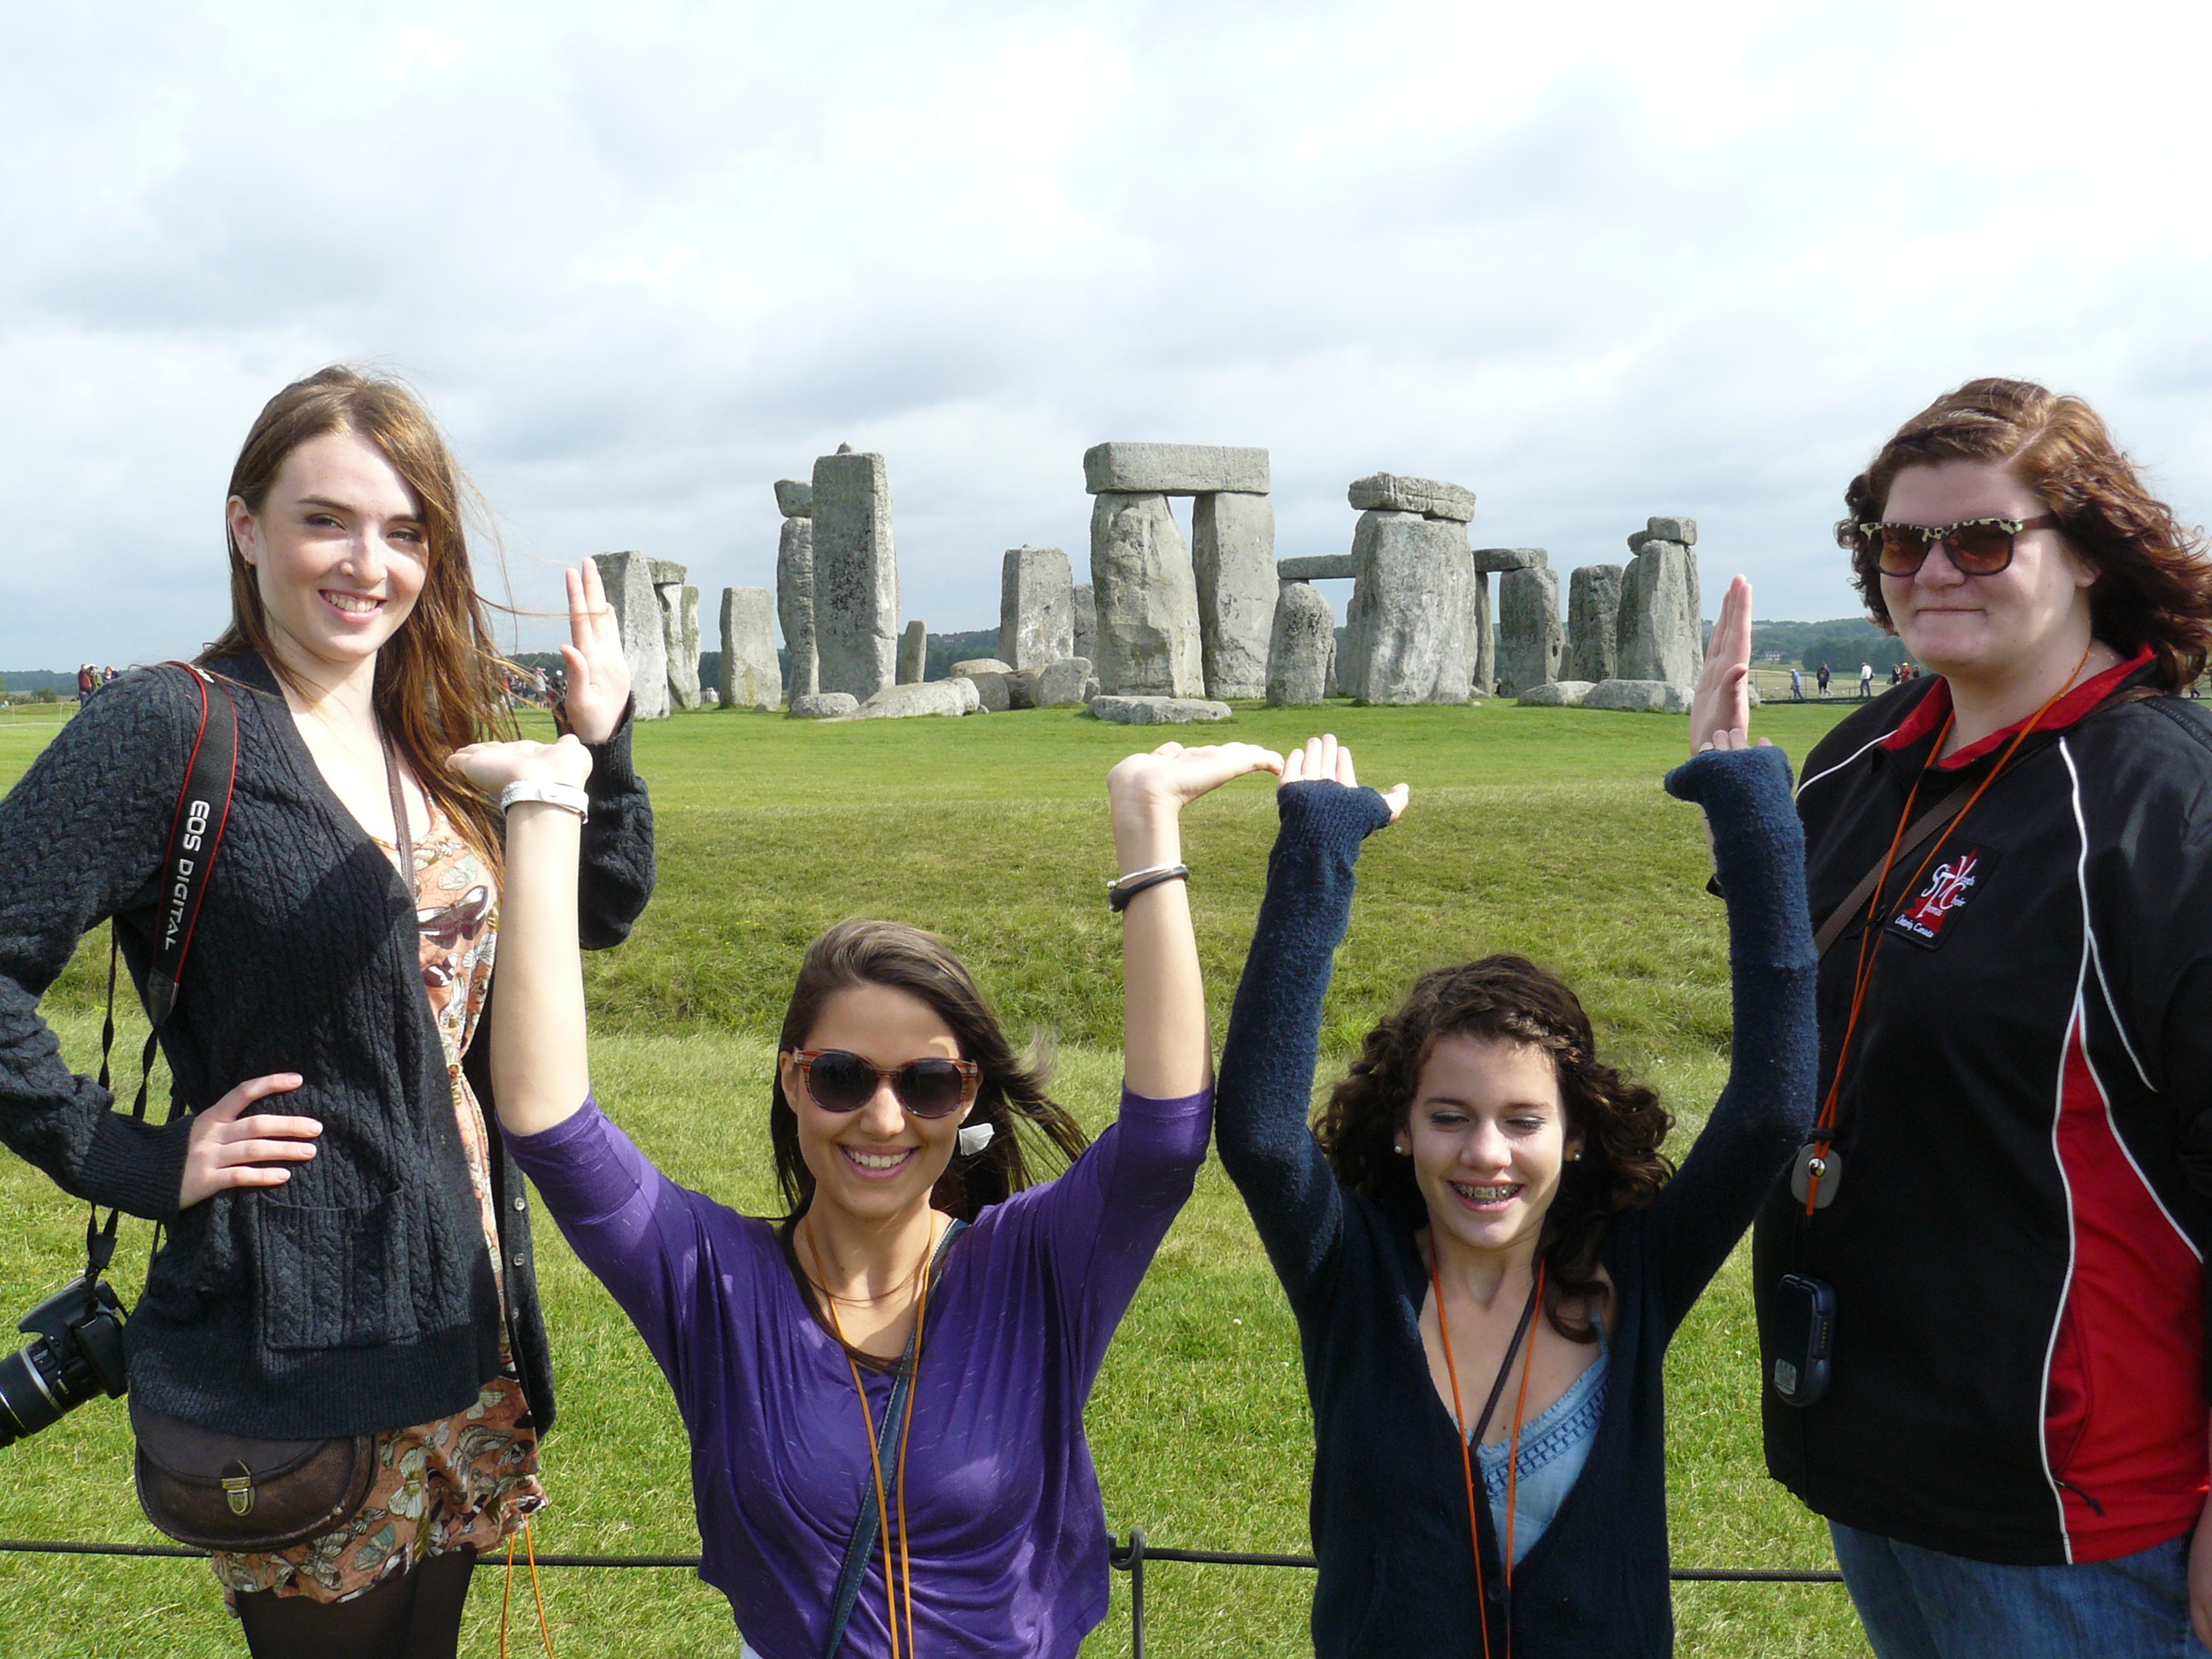  Helping out the stones at Stonehenge.​ 